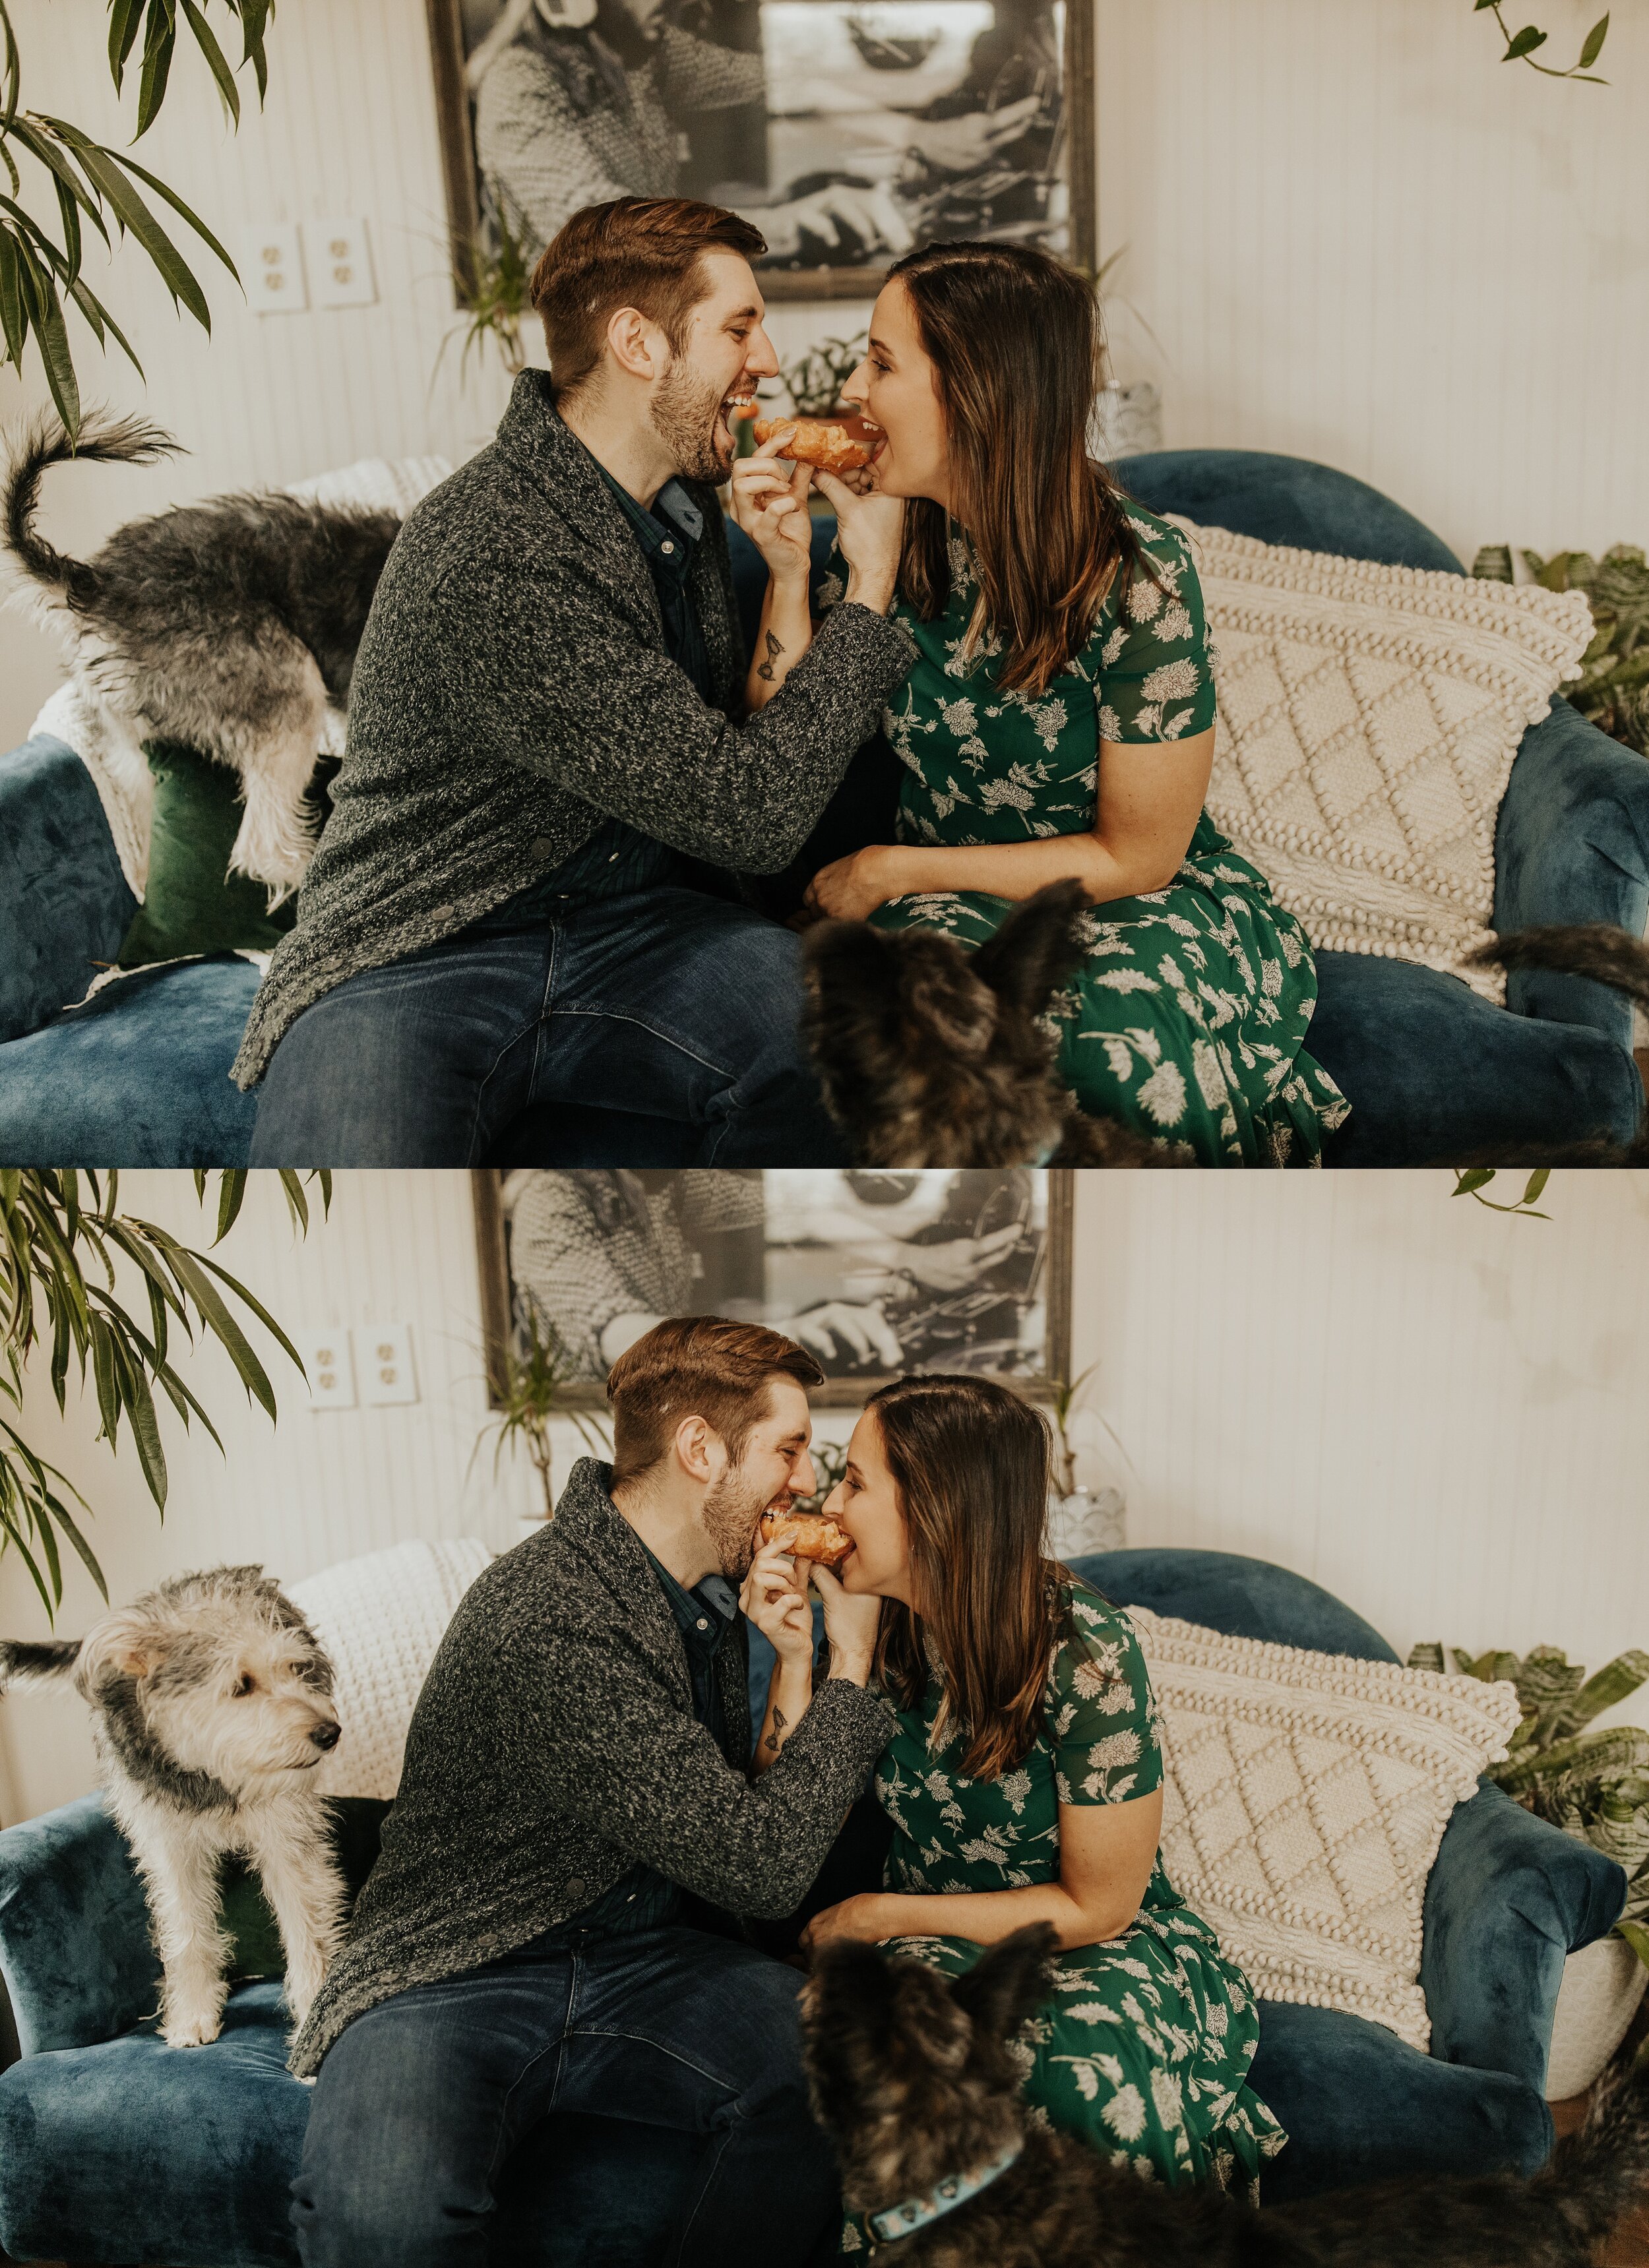 jessika-christine-photography-in+home-engagement-couples-cozy-adventurous-session (9).jpg